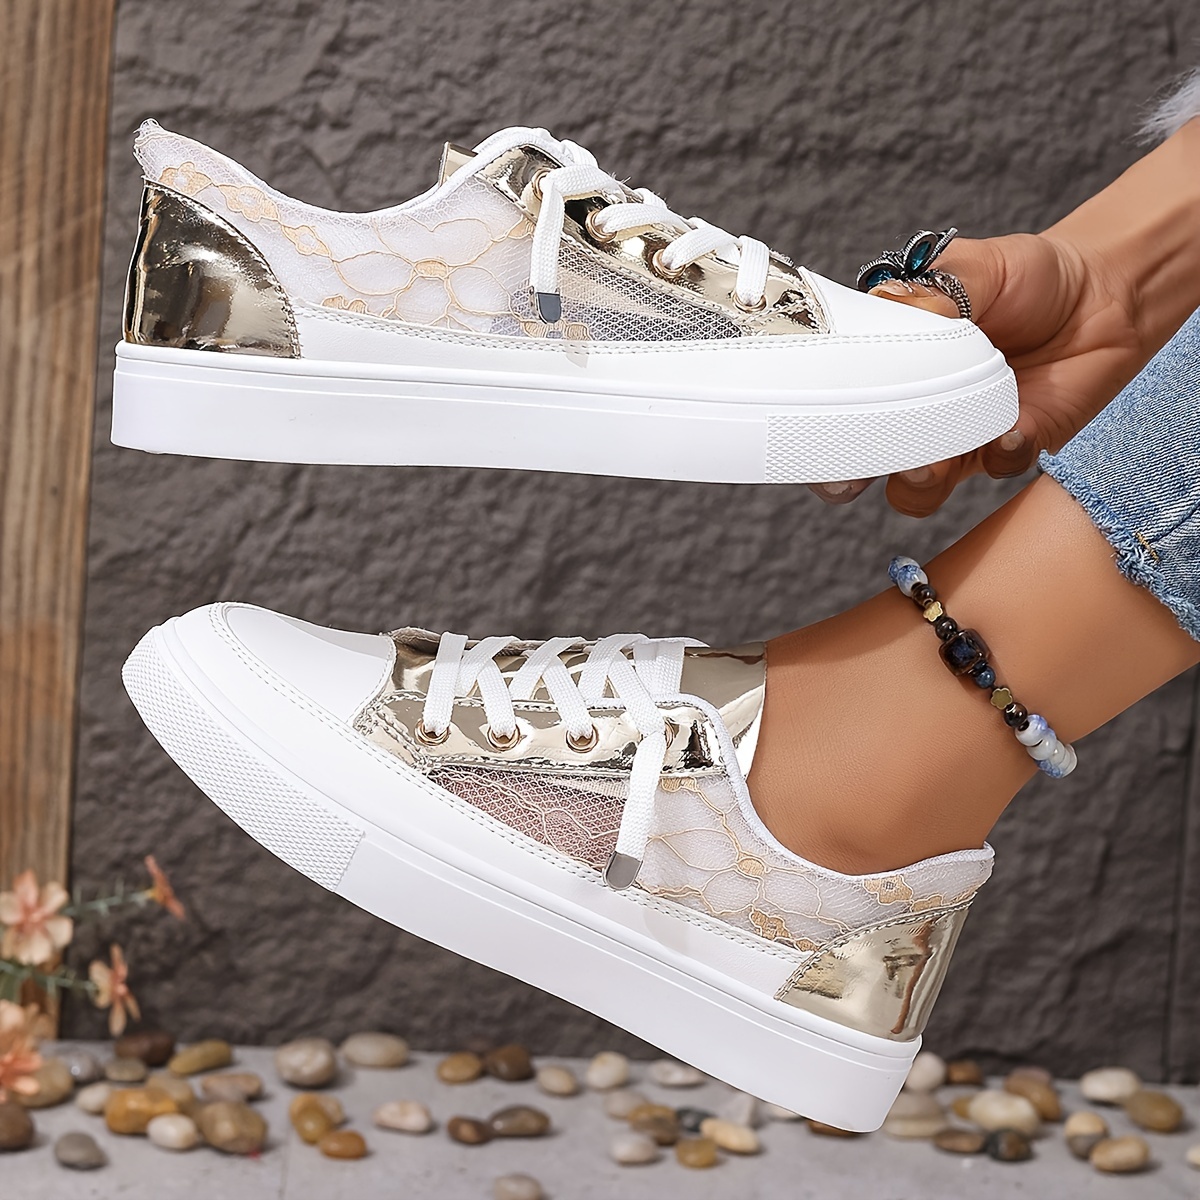 

Women's Summer Fashion Sneakers, Breathable Mesh Lace-up Round Toe Flats, Casual Low Top Sports Shoes - Perfect For Versatile Styling